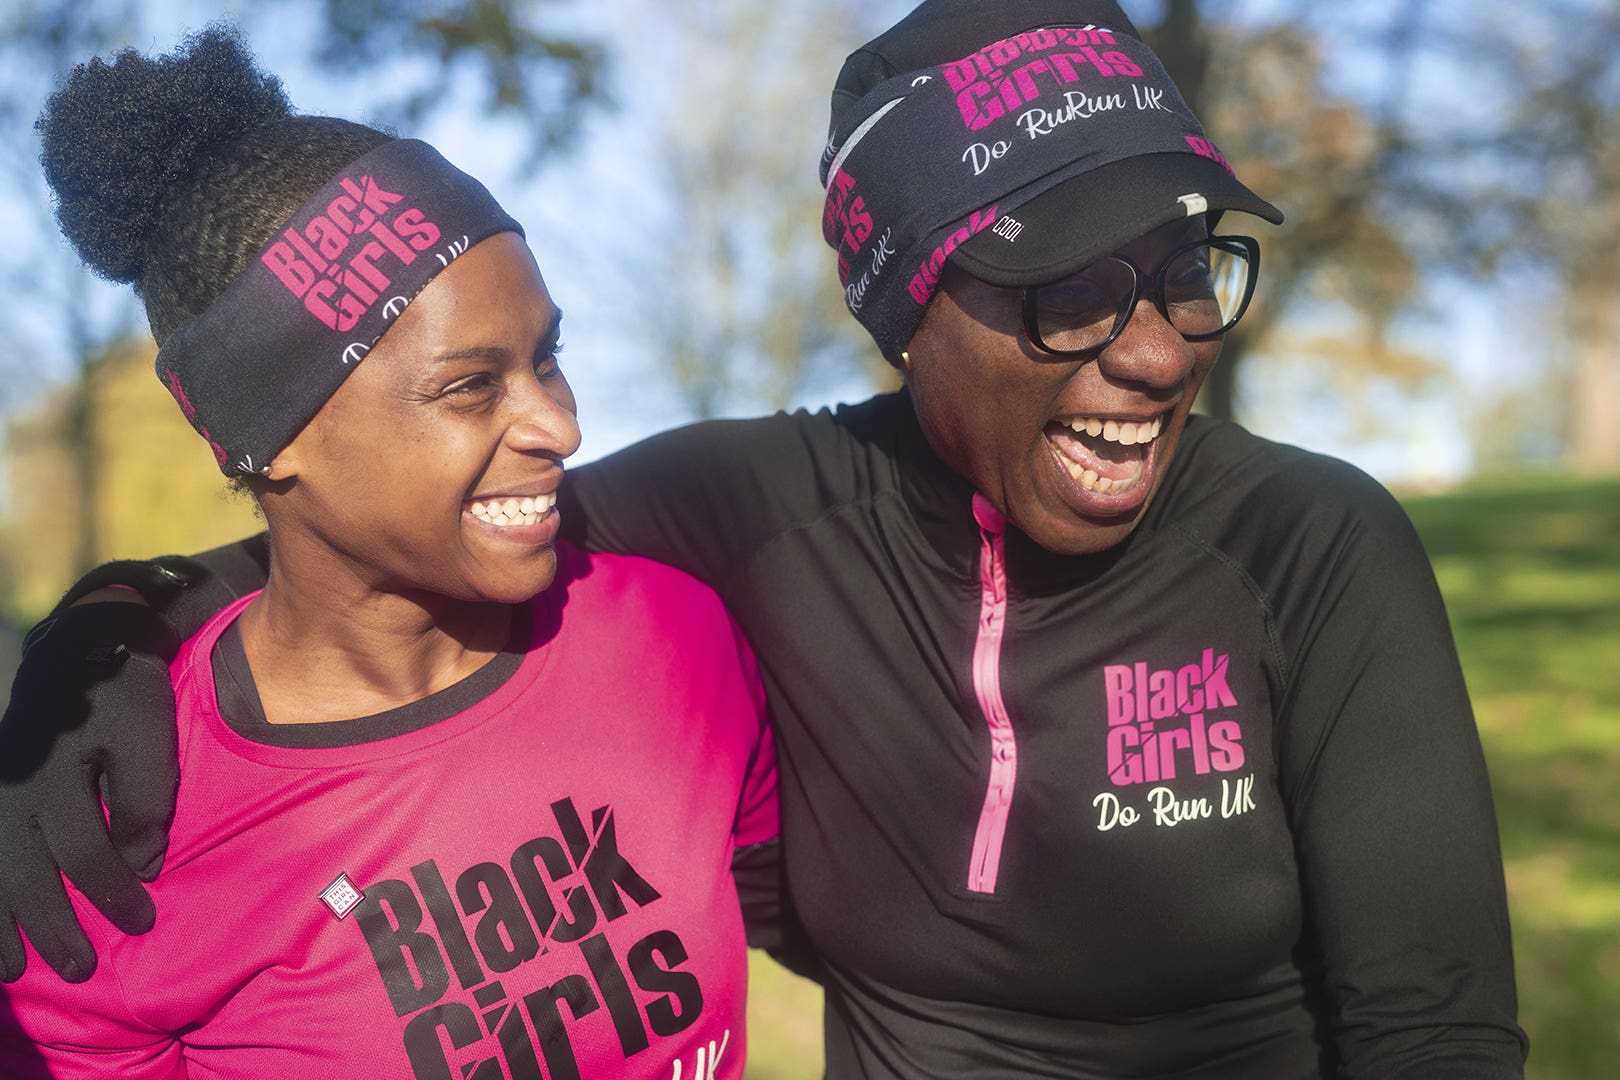 Live, love, laugh and run, says women's running group founder